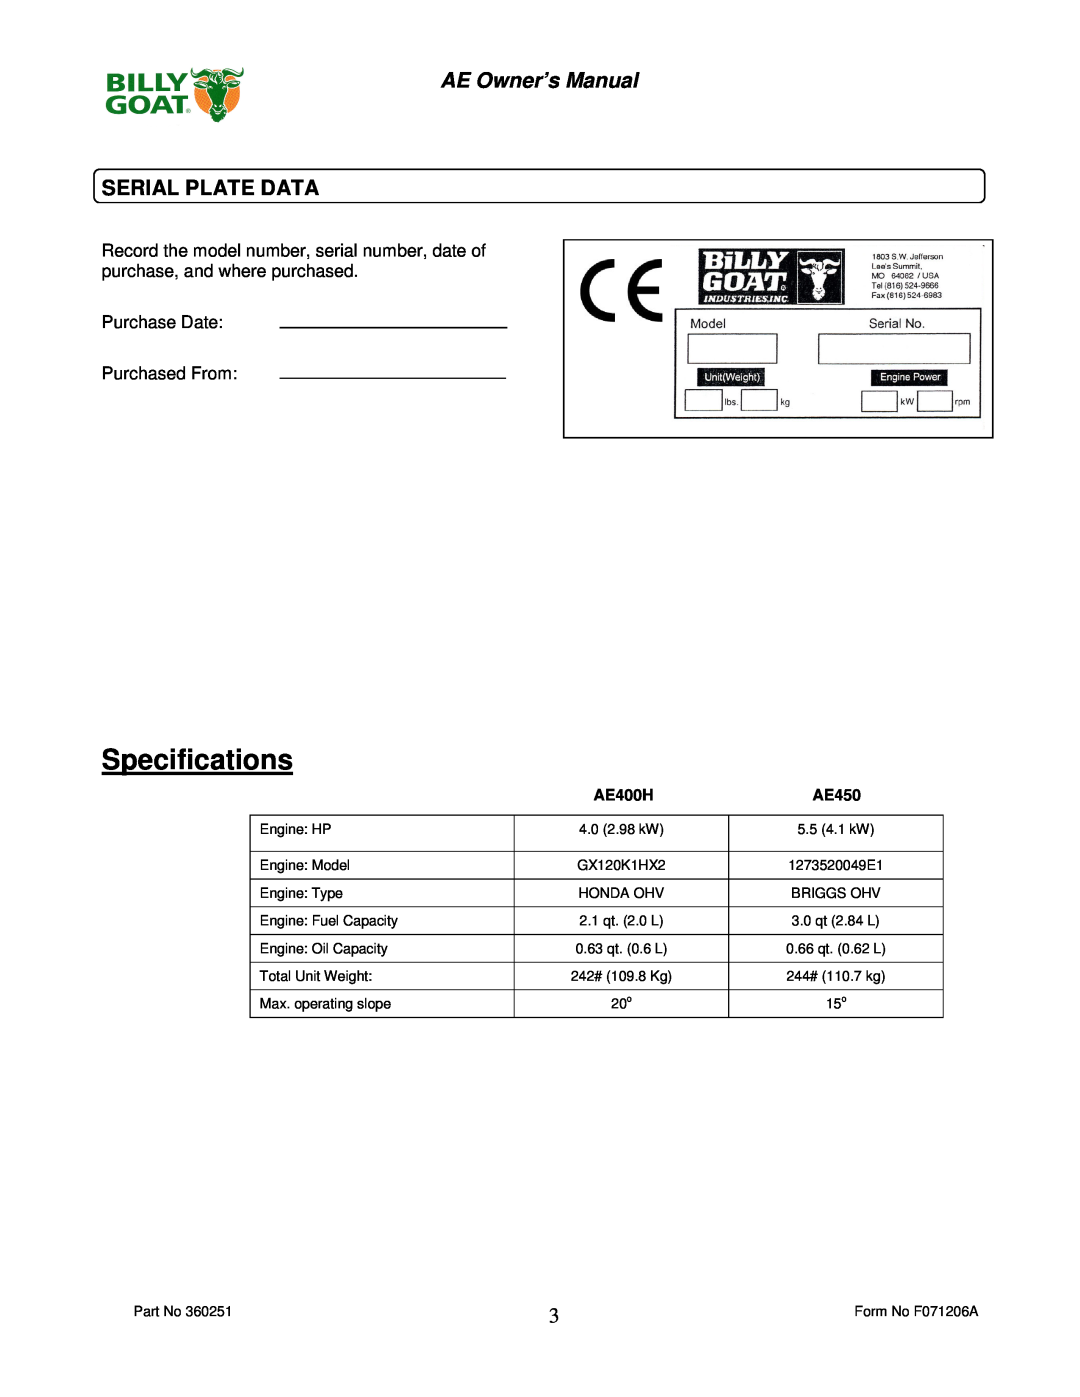 Billy Goat AE400H, AE450 owner manual Serial Plate Data, Specifications 